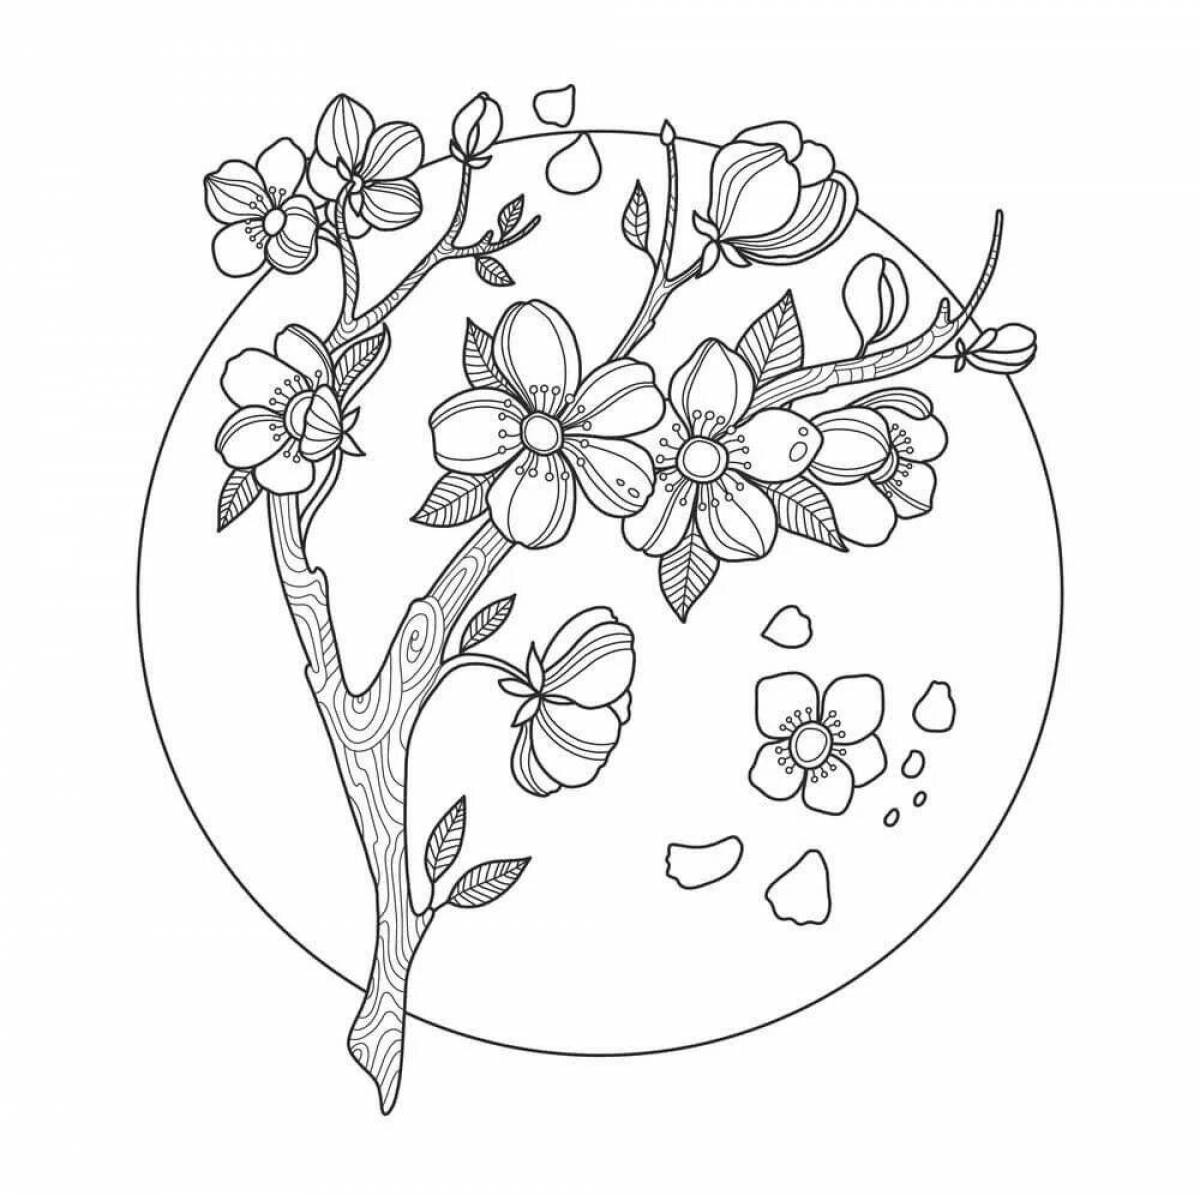 Adorable cherry blossom coloring page for kids